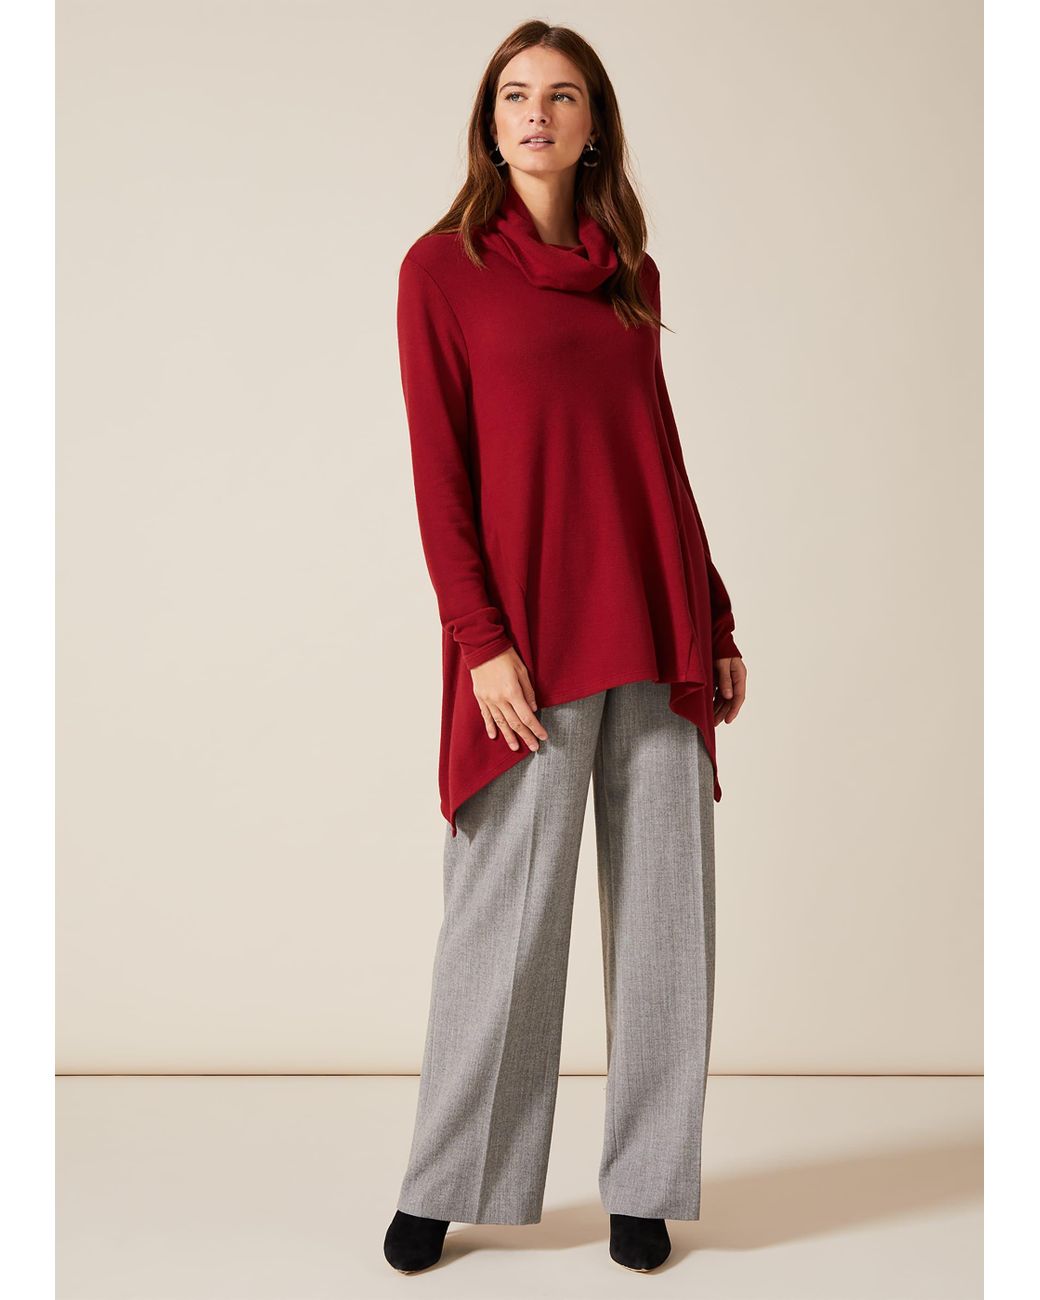 Phase Eight 's Shari Roll Neck Swing Jumper in Bordeaux (Red) - Lyst